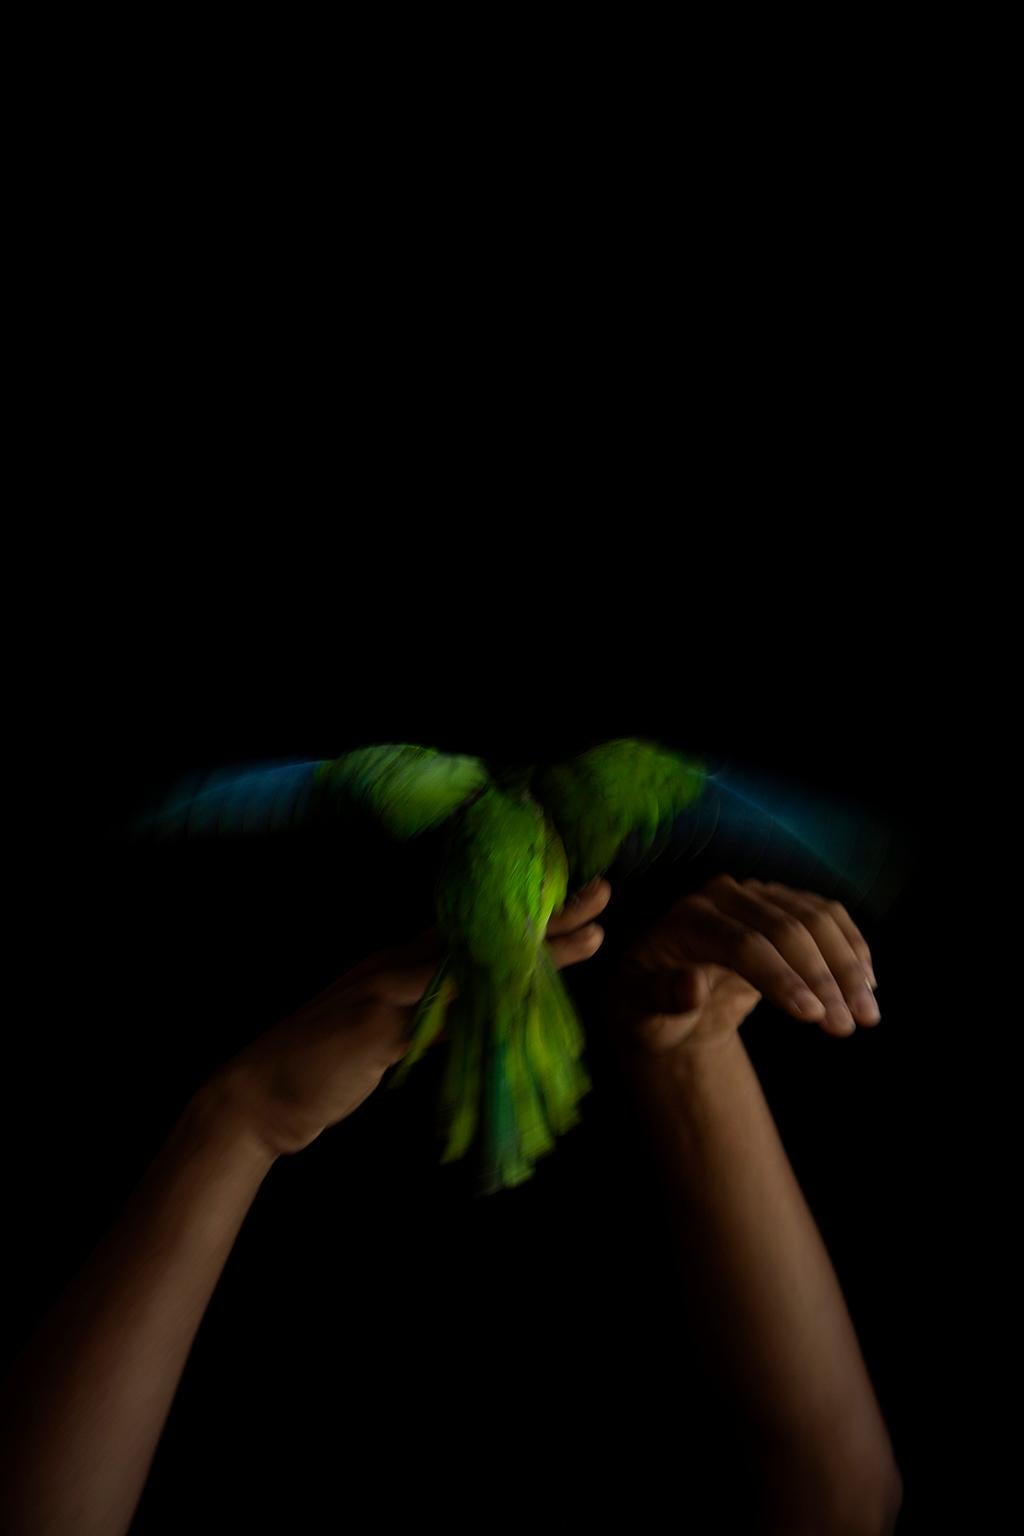 Ricky Cohete Figurative Photograph - Verde, Nude. Color Limited Edition Photograph